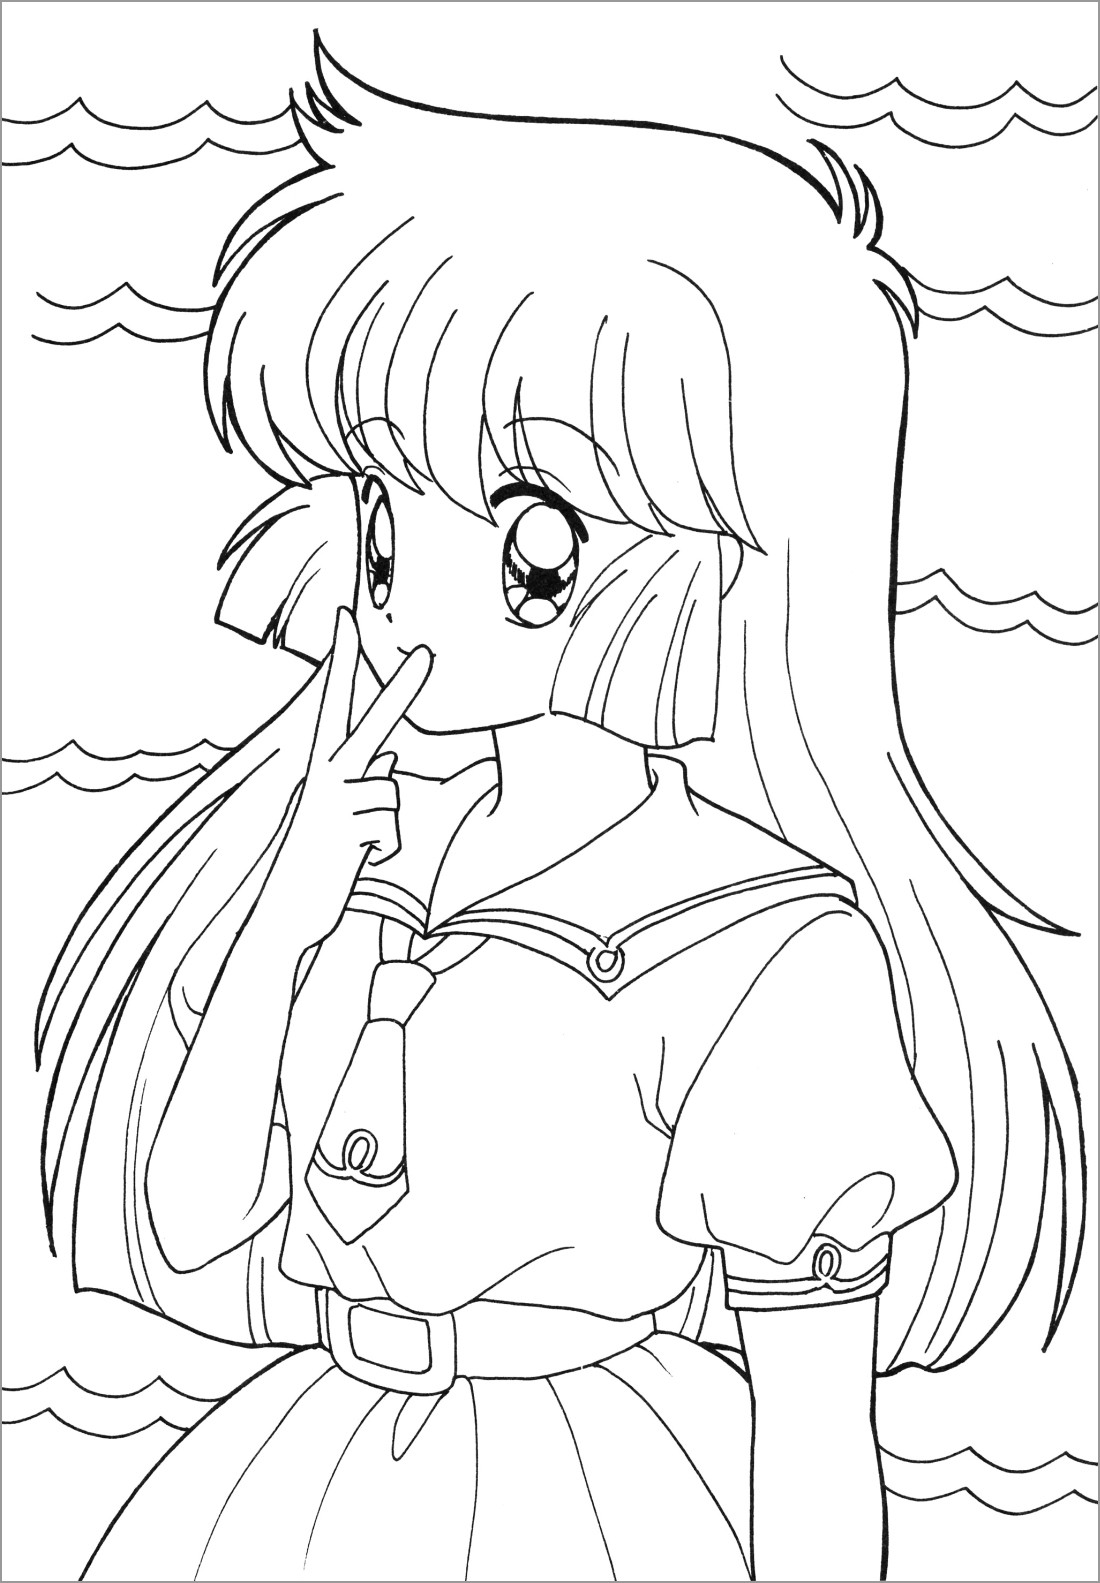 Anime Coloring Page for Kids   ColoringBay